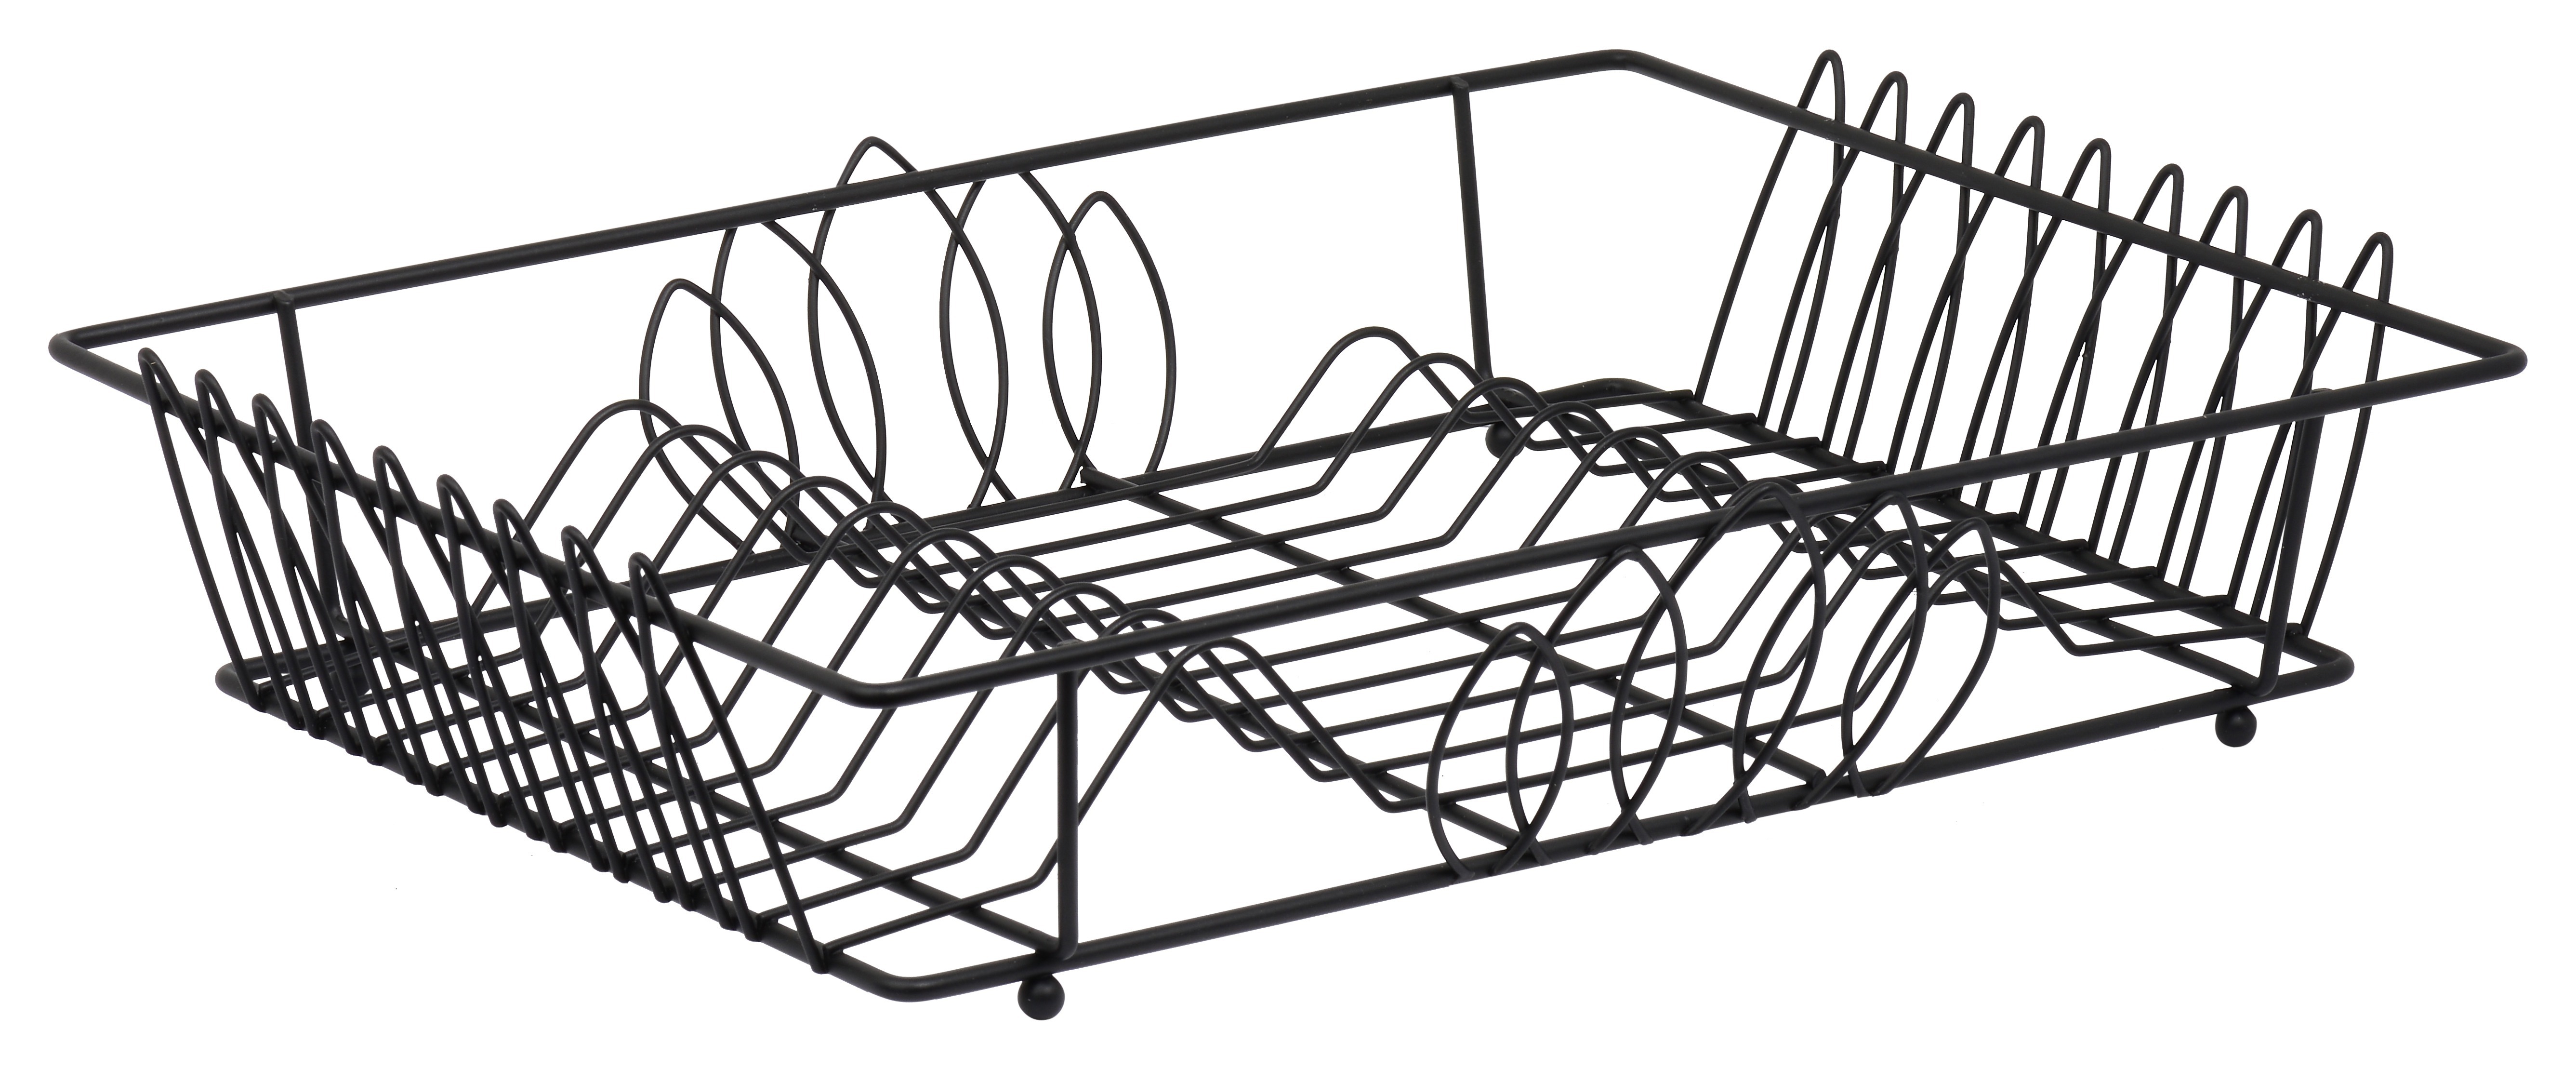 Dish Rack - High Quality Stainless Steel with Black Powder Coating